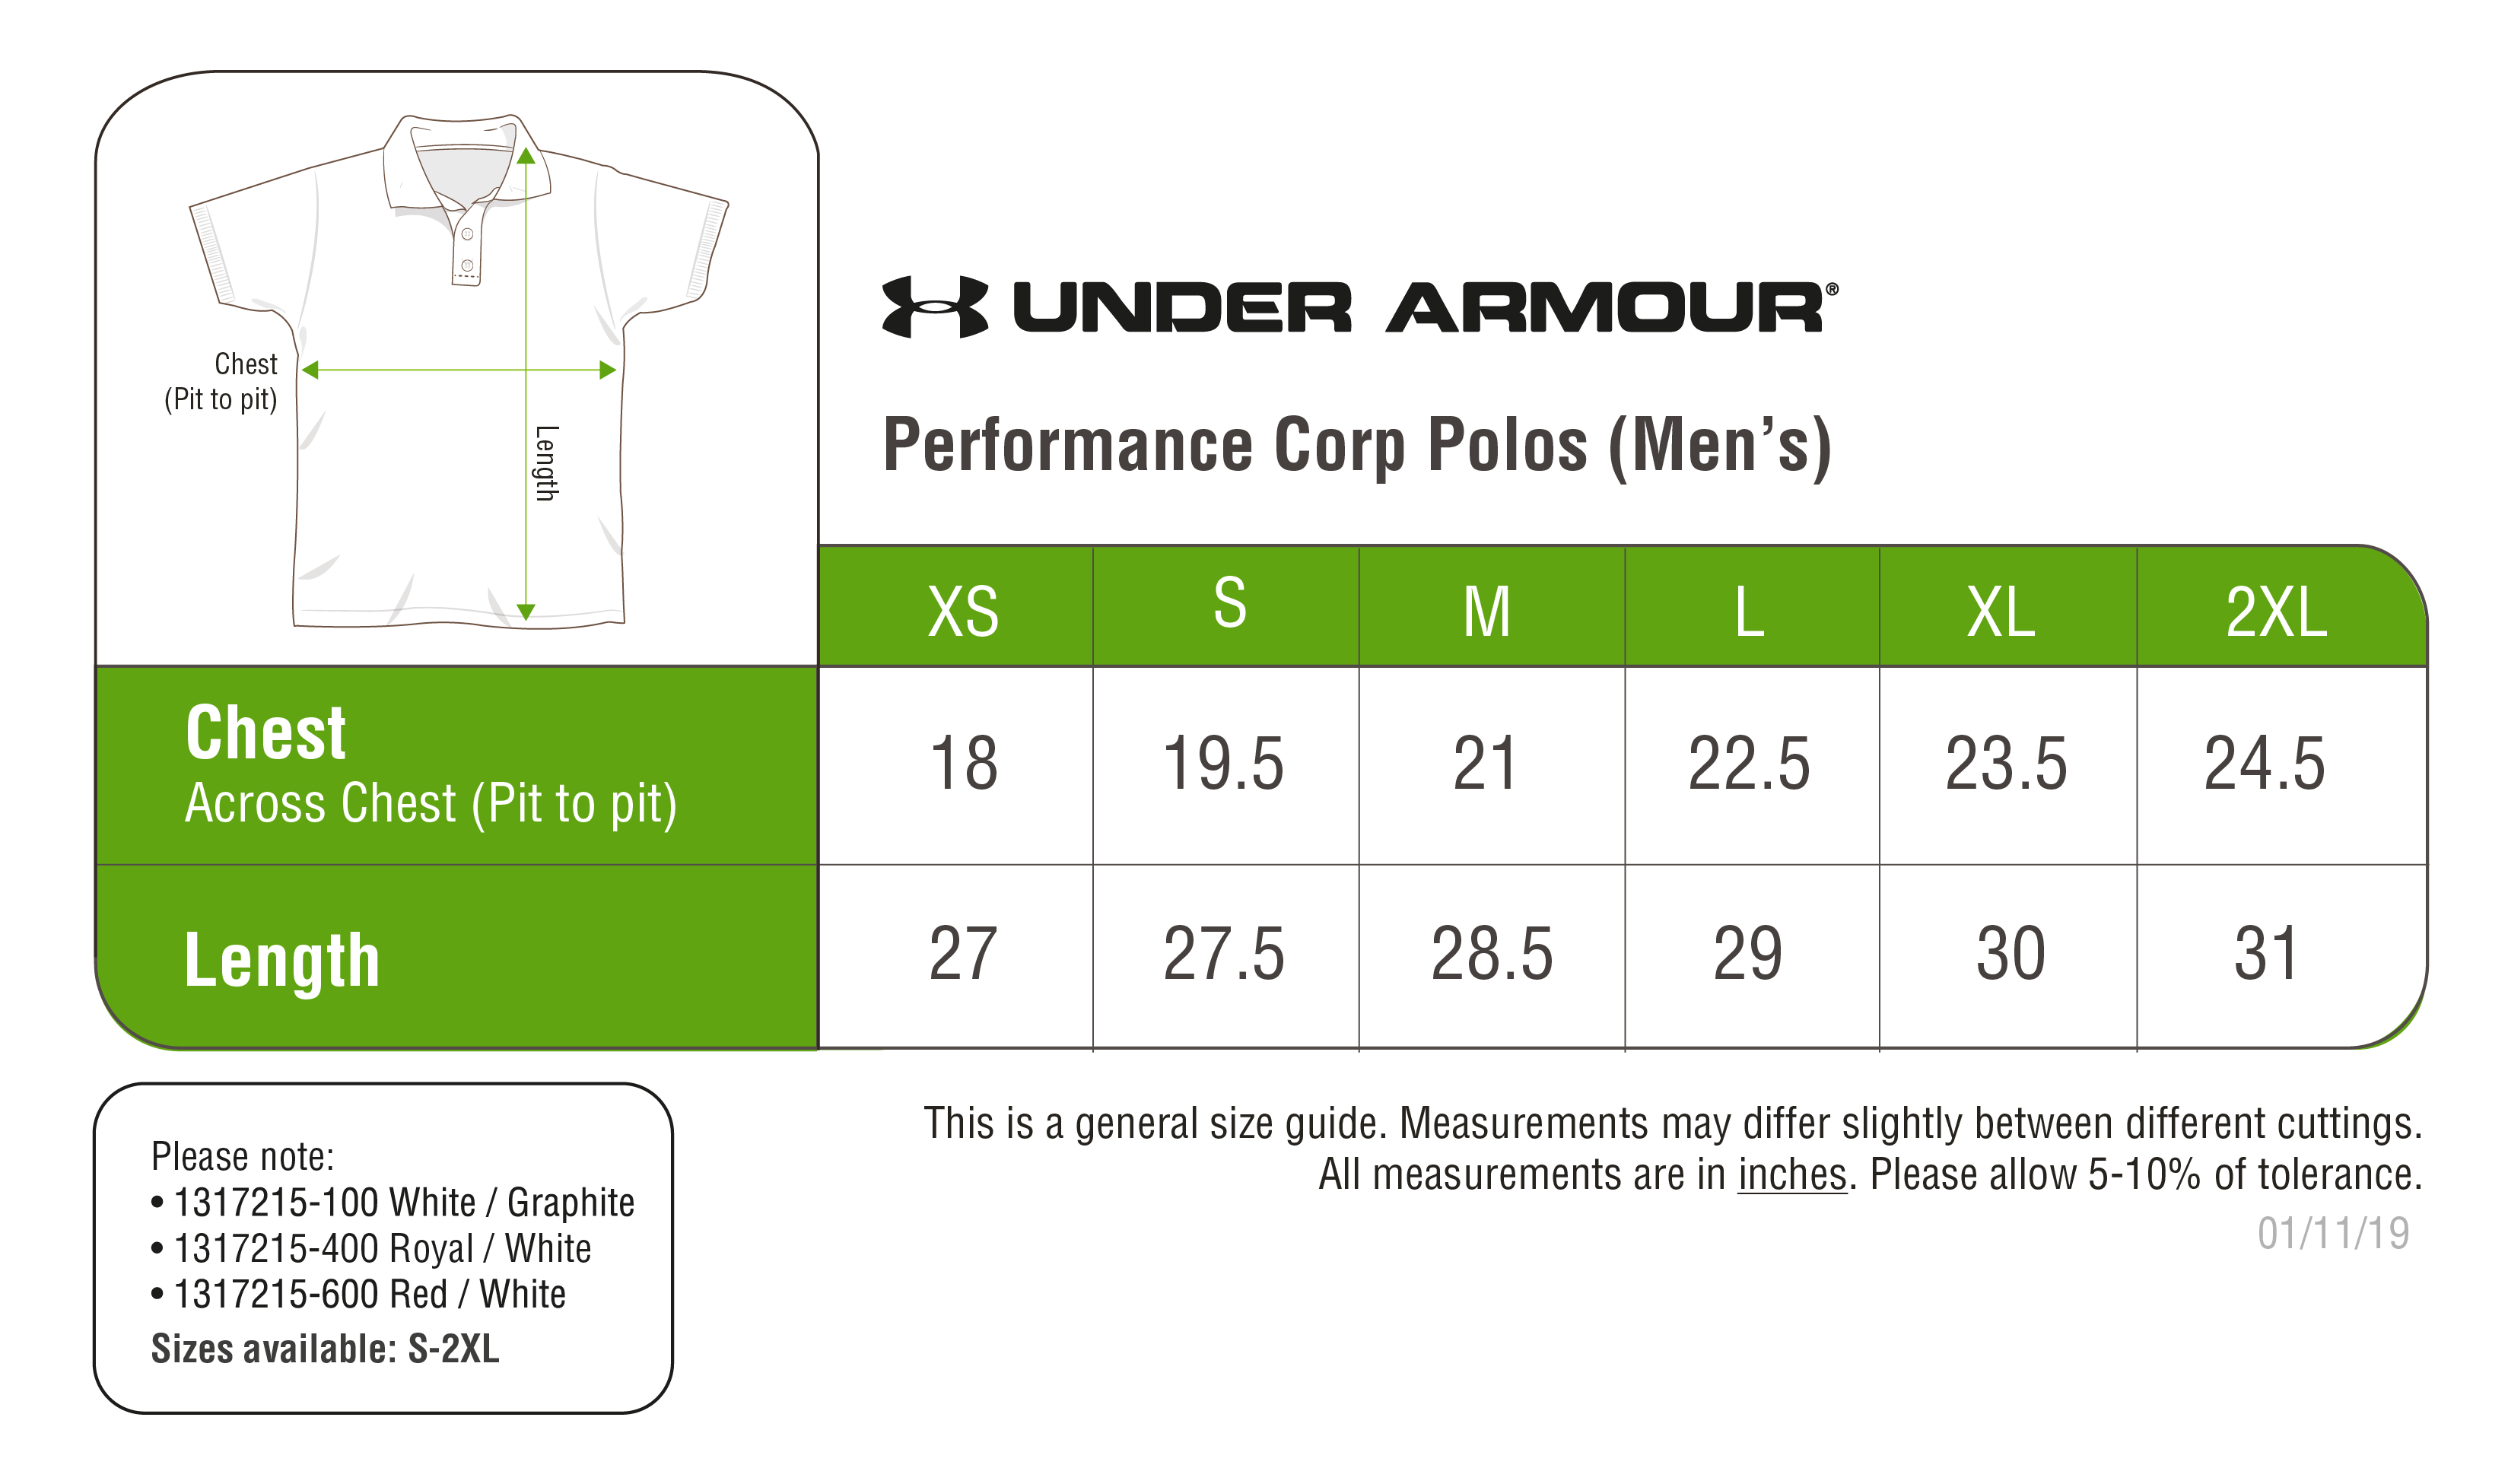 Under Armour Performance Corp Polos (Men) Ark Industries